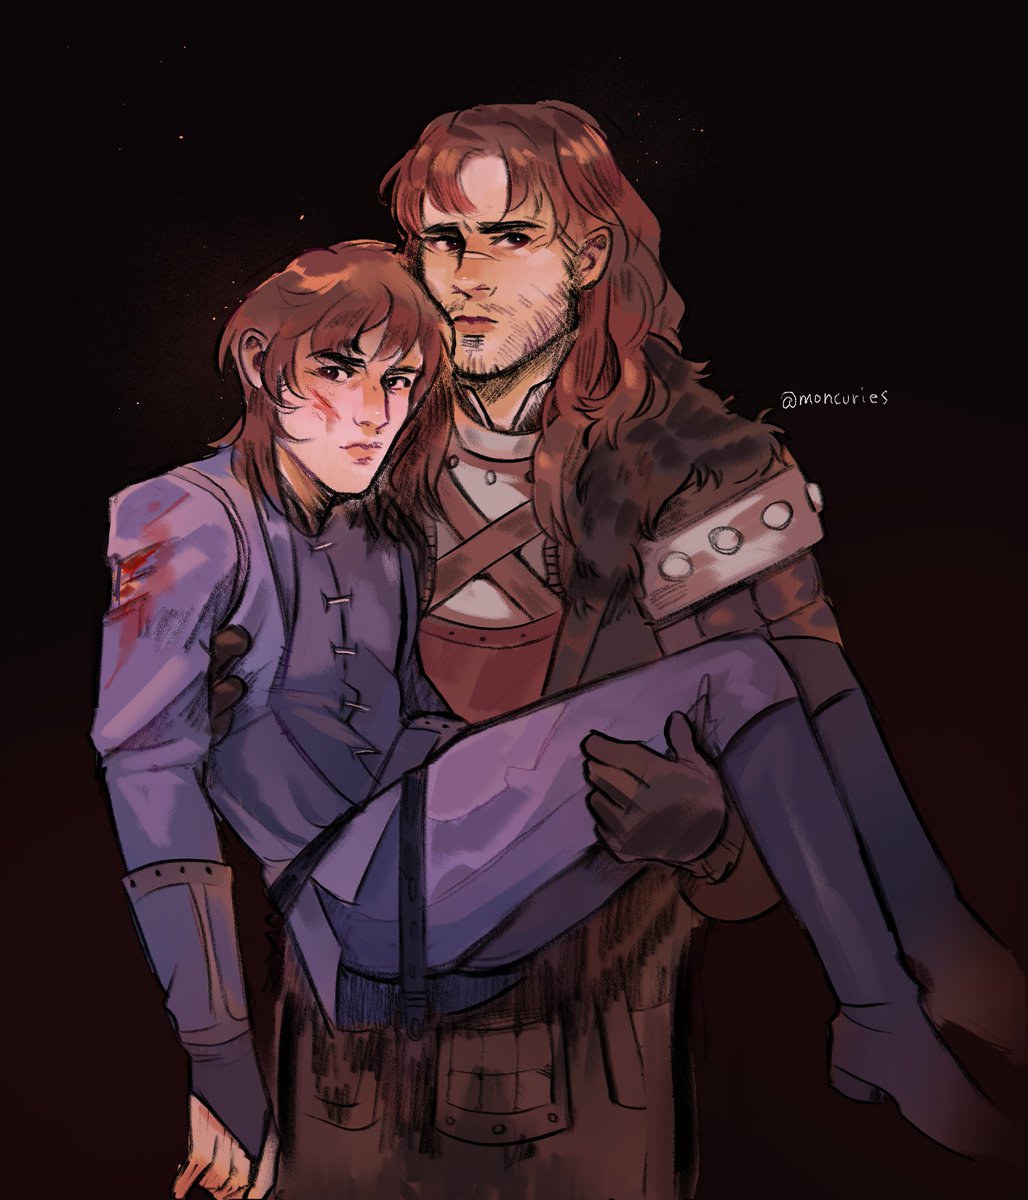 「pact of ice and fire #hotd jace and creg」|monty 🦷のイラスト